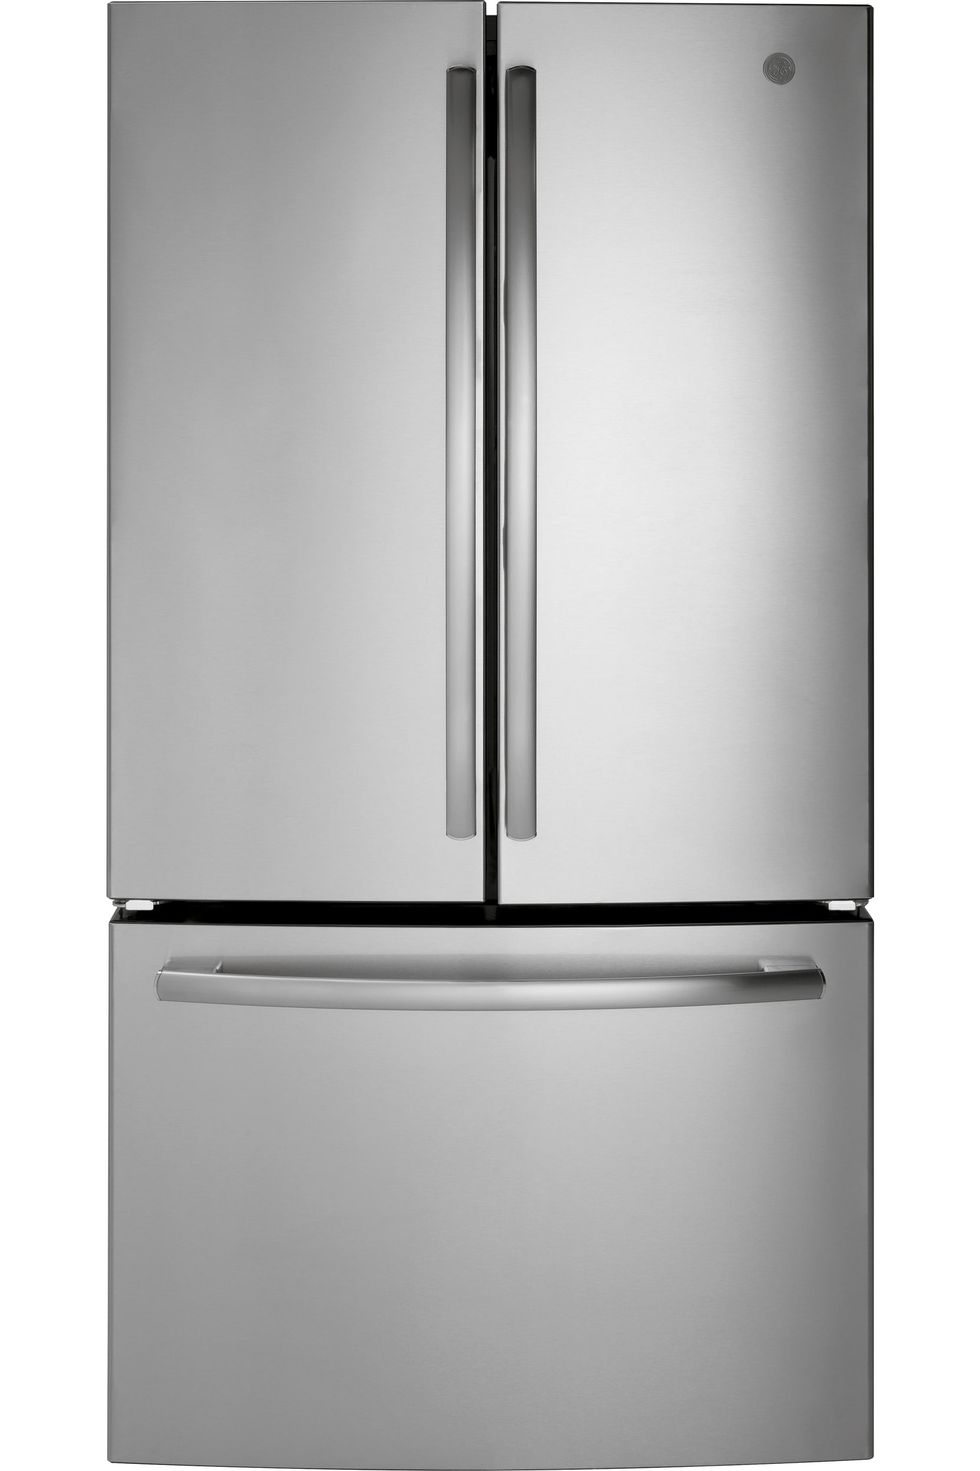 Top 10 Appliance Manufacturers